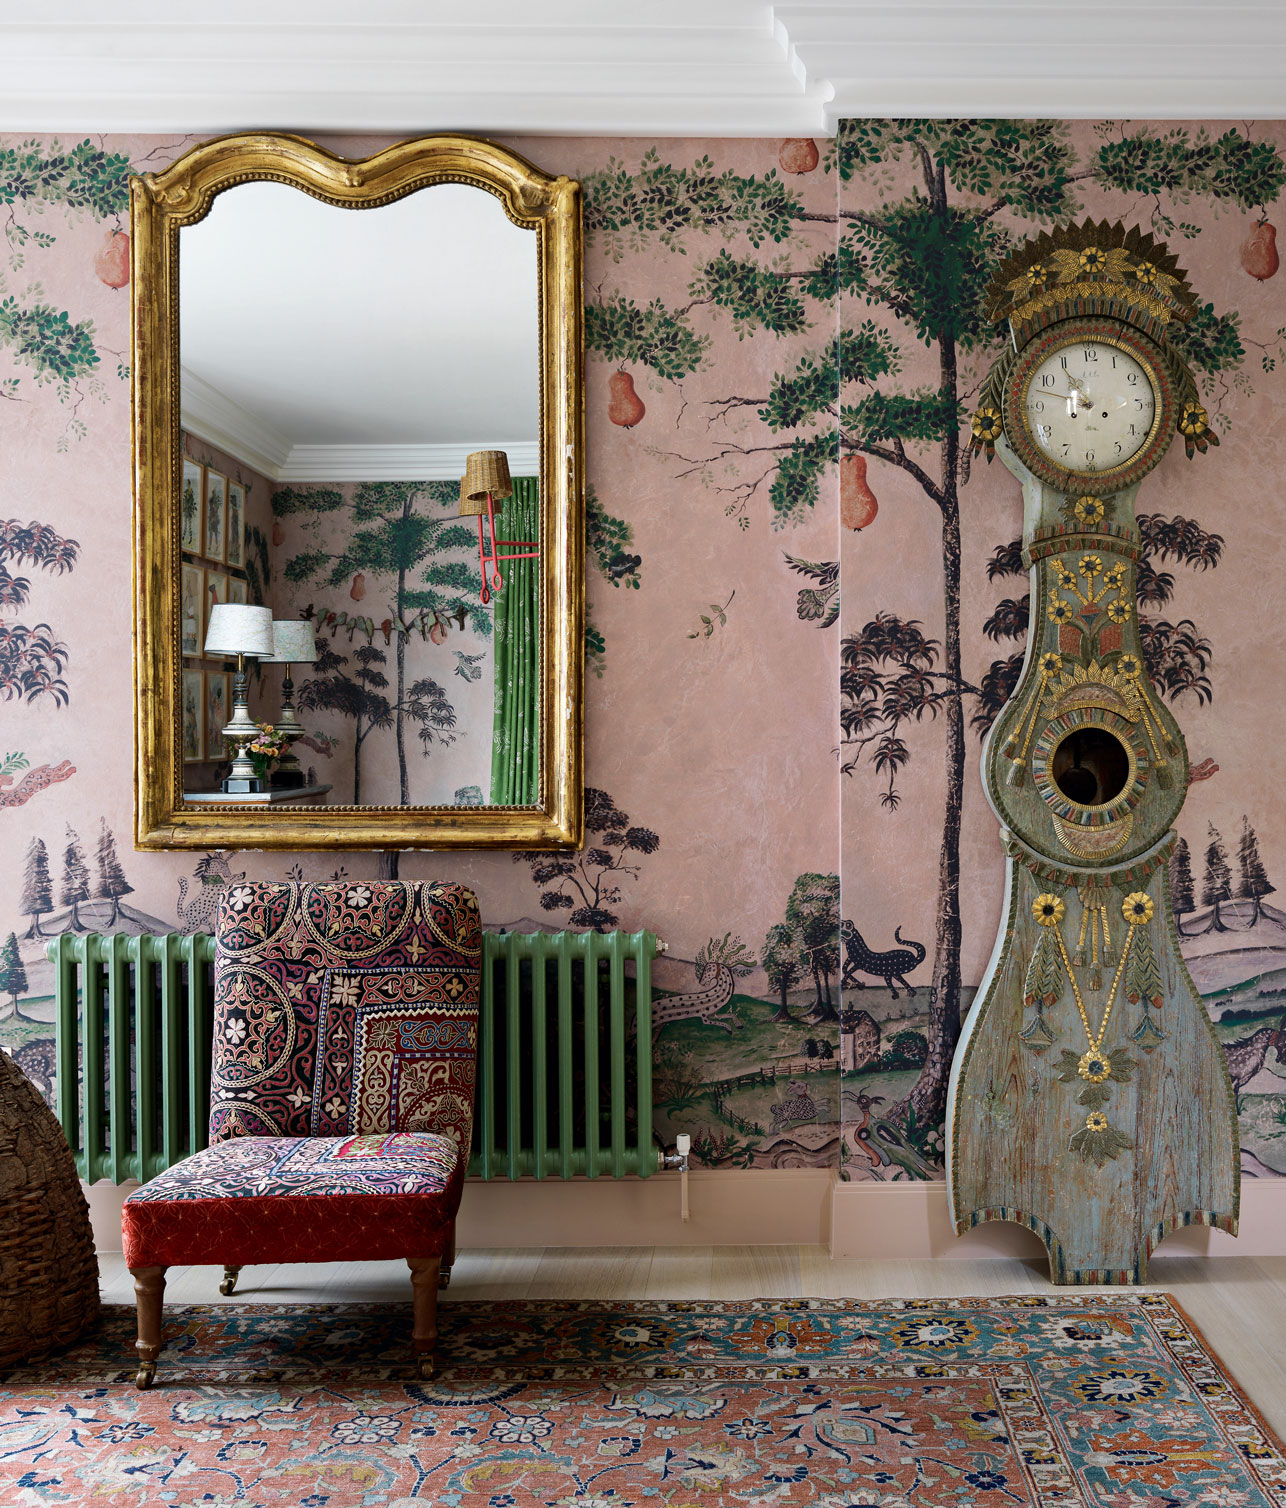 Kit Kemp: Hyde Park Gate, private residence, London, UK, 2020. Picture credit: Simon Brown, courtesy of Firmdale Hotels